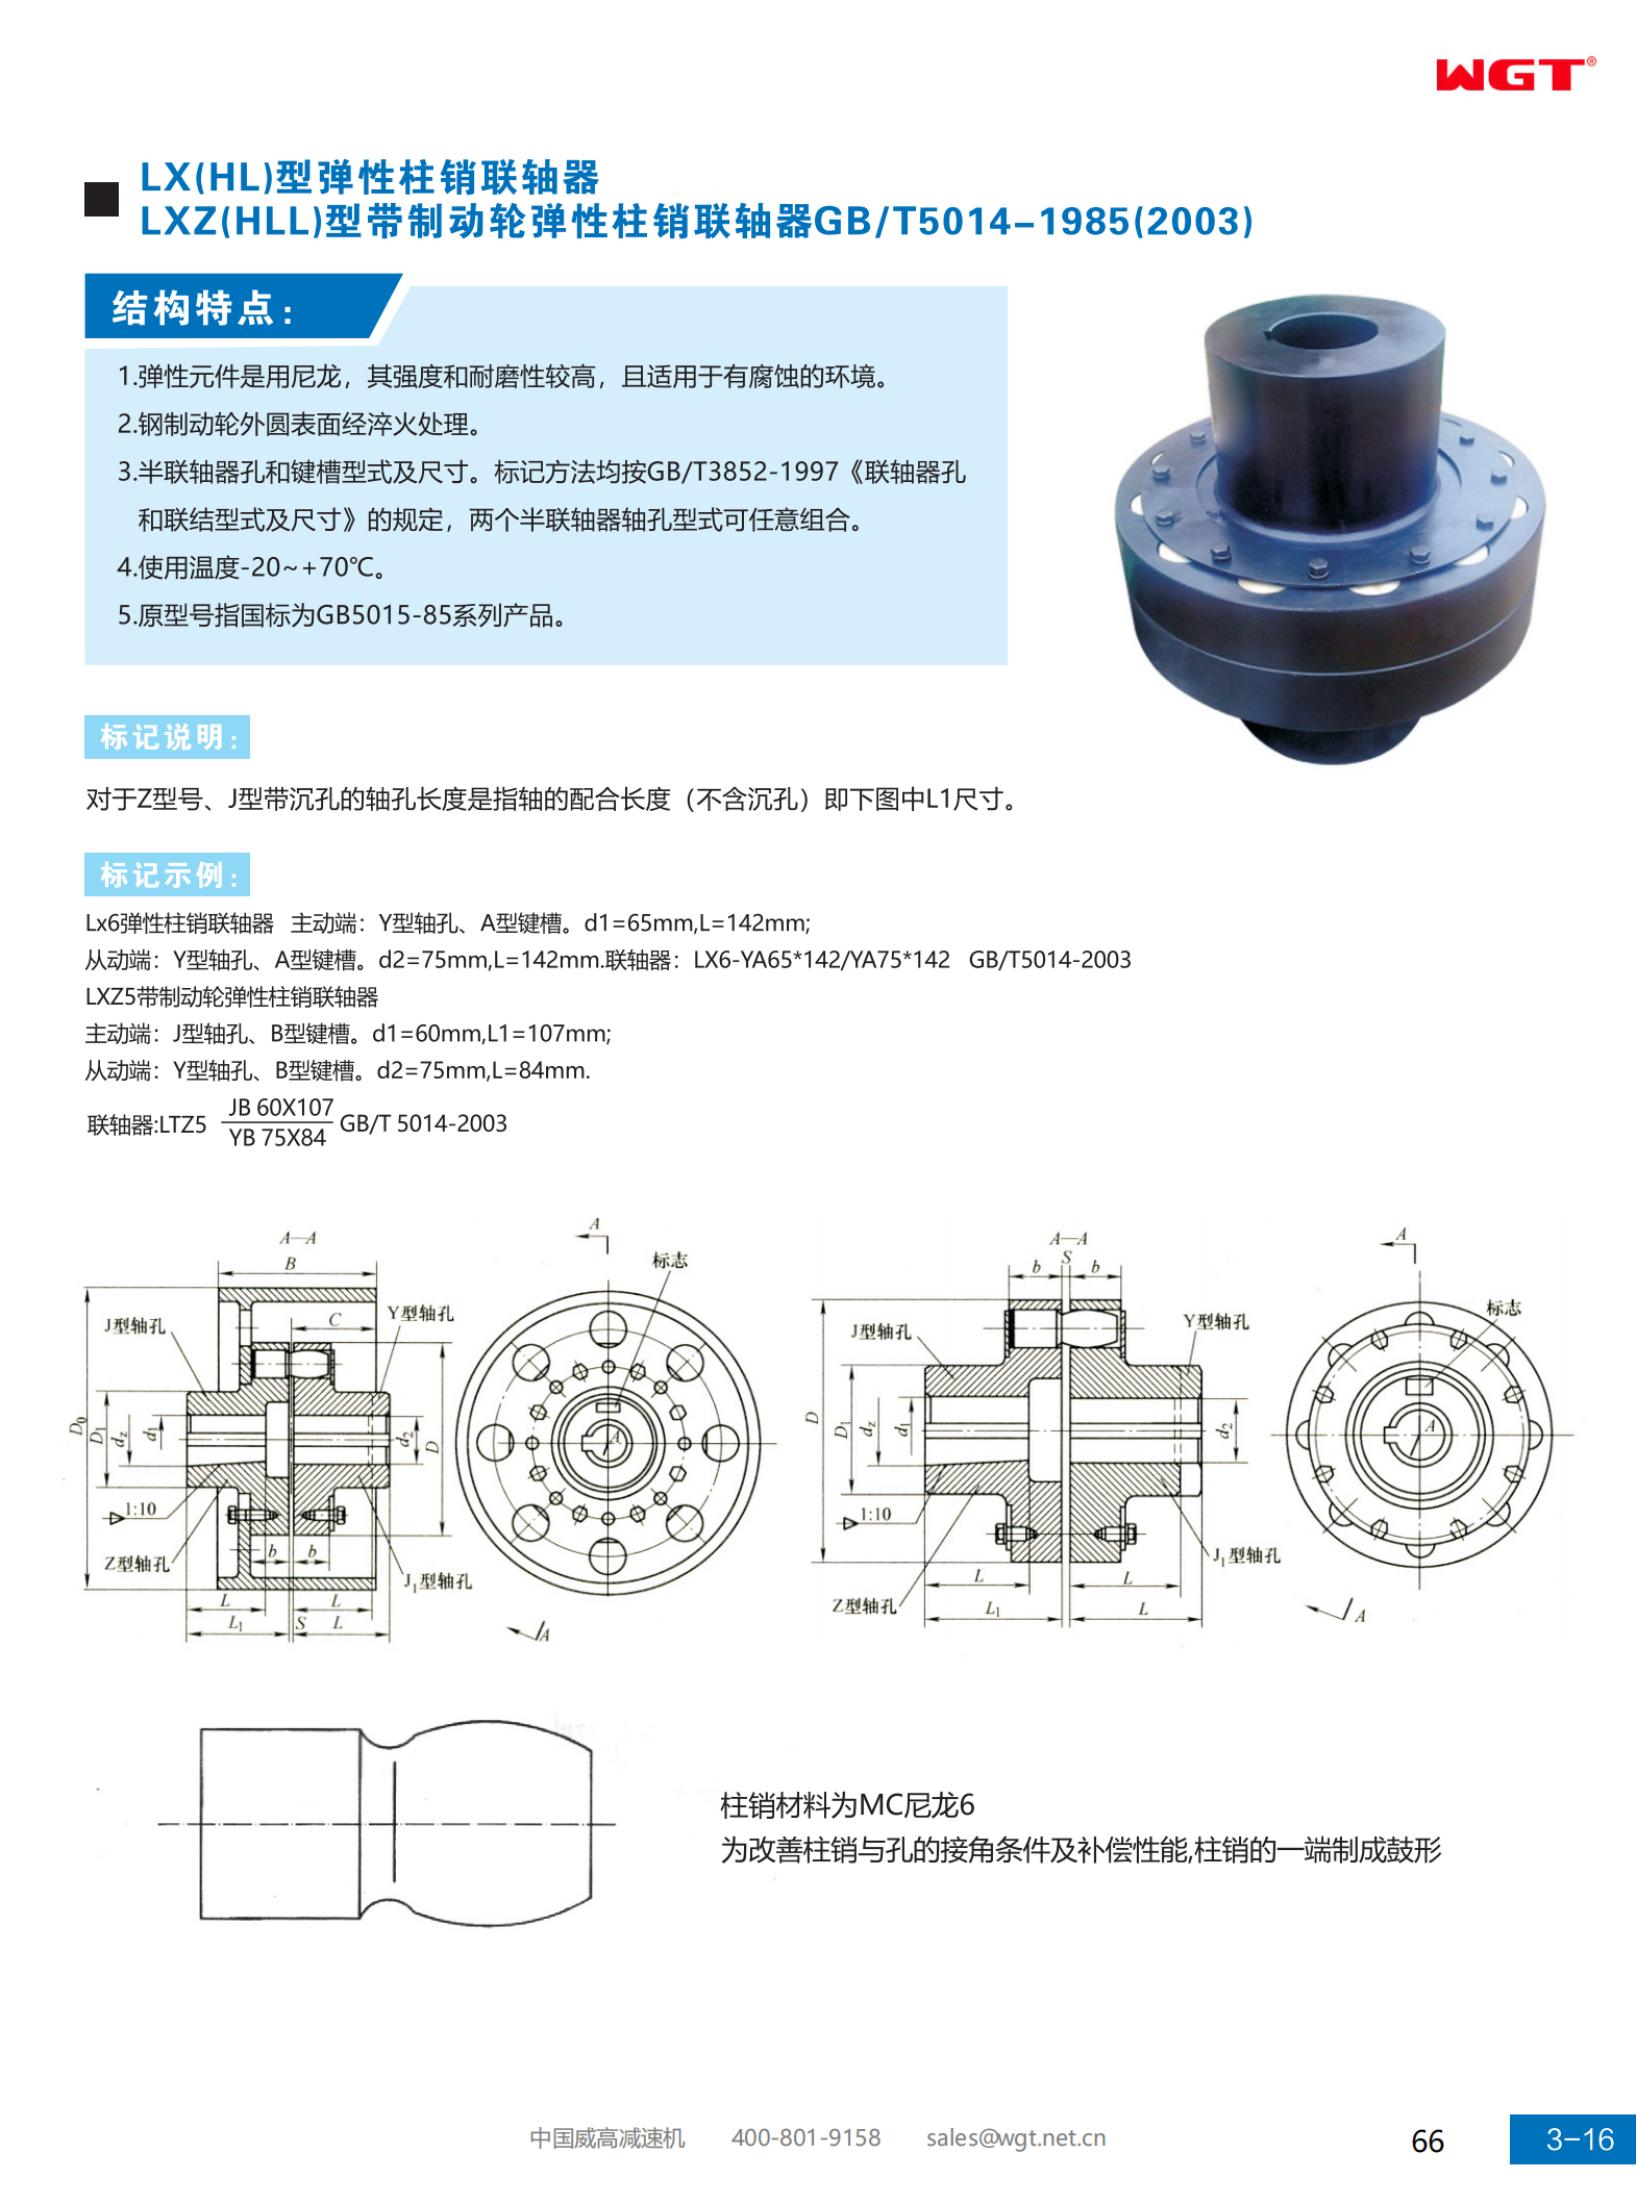 Basic parameters and main dimensions of LXZ (HLL) elastic pin coupling with brake wheel GB/T5014-1985 (2003)